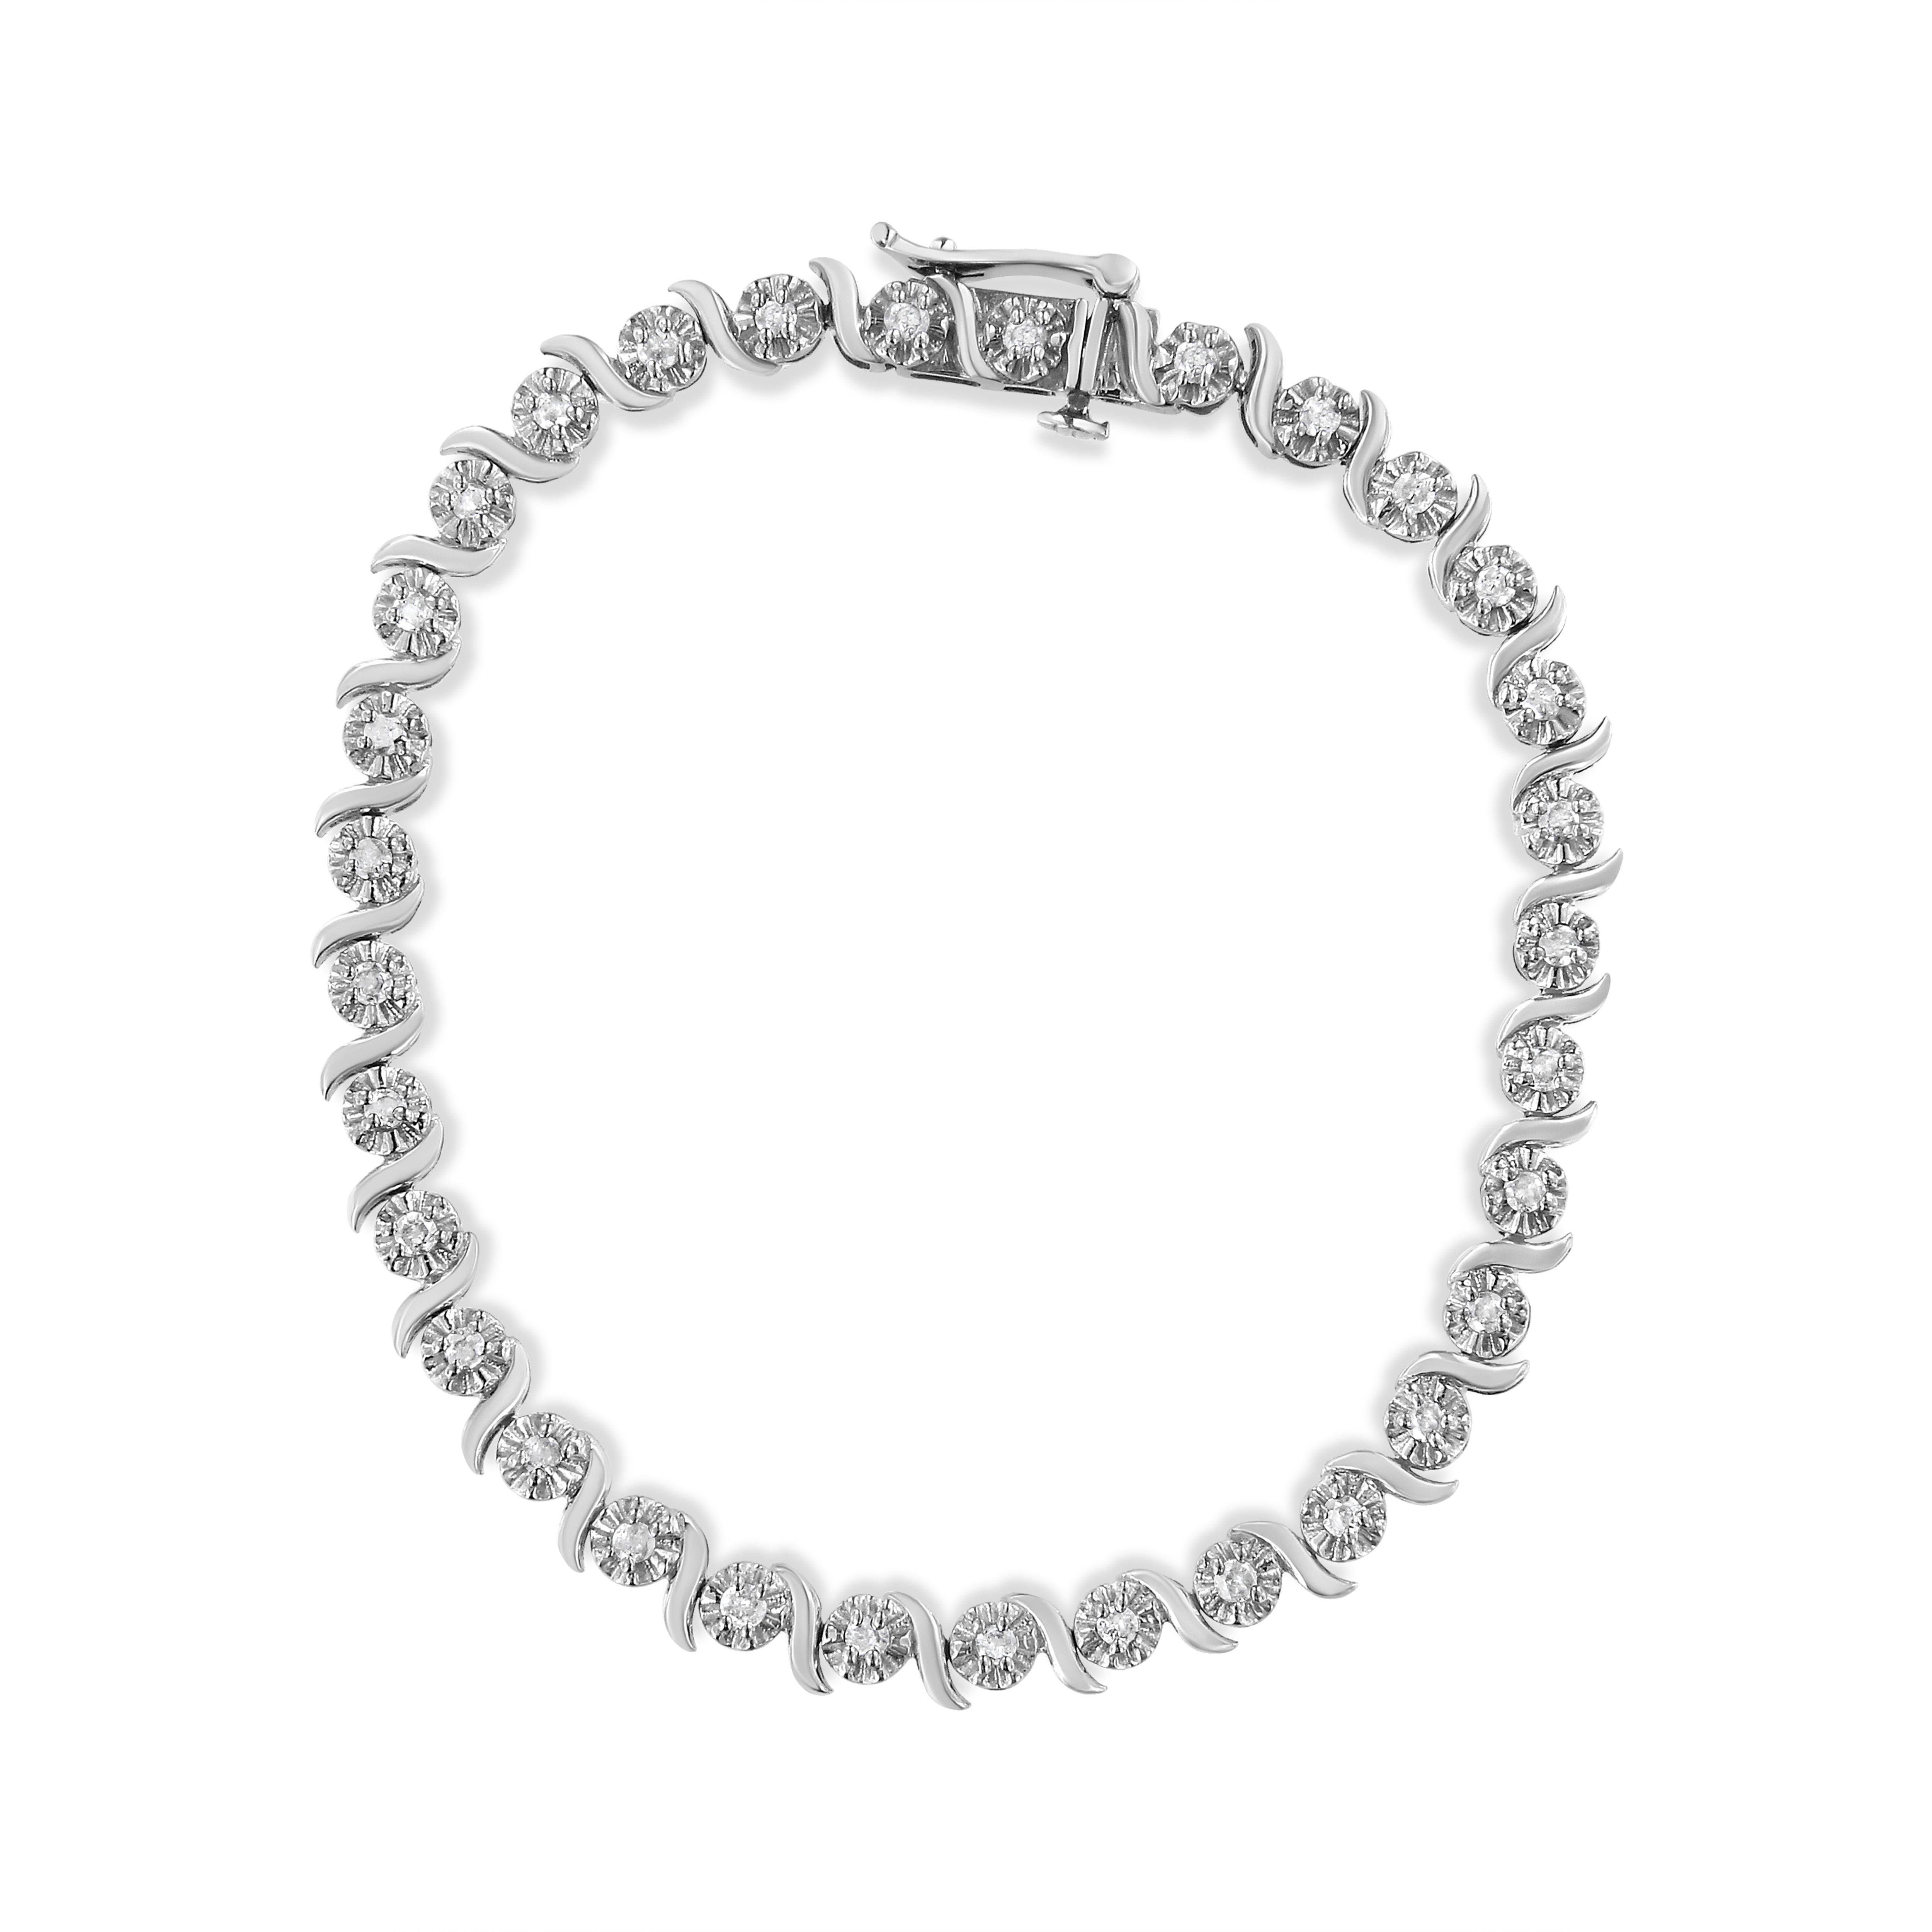 Feminine yet glamorous, this bracelet shines in a polished sterling silver setting, which spirals around each beautiful rose cut diamond for a unique and elegant gift she'll remember forever. Rose-cut, promo quality diamonds are milky and cloudy in